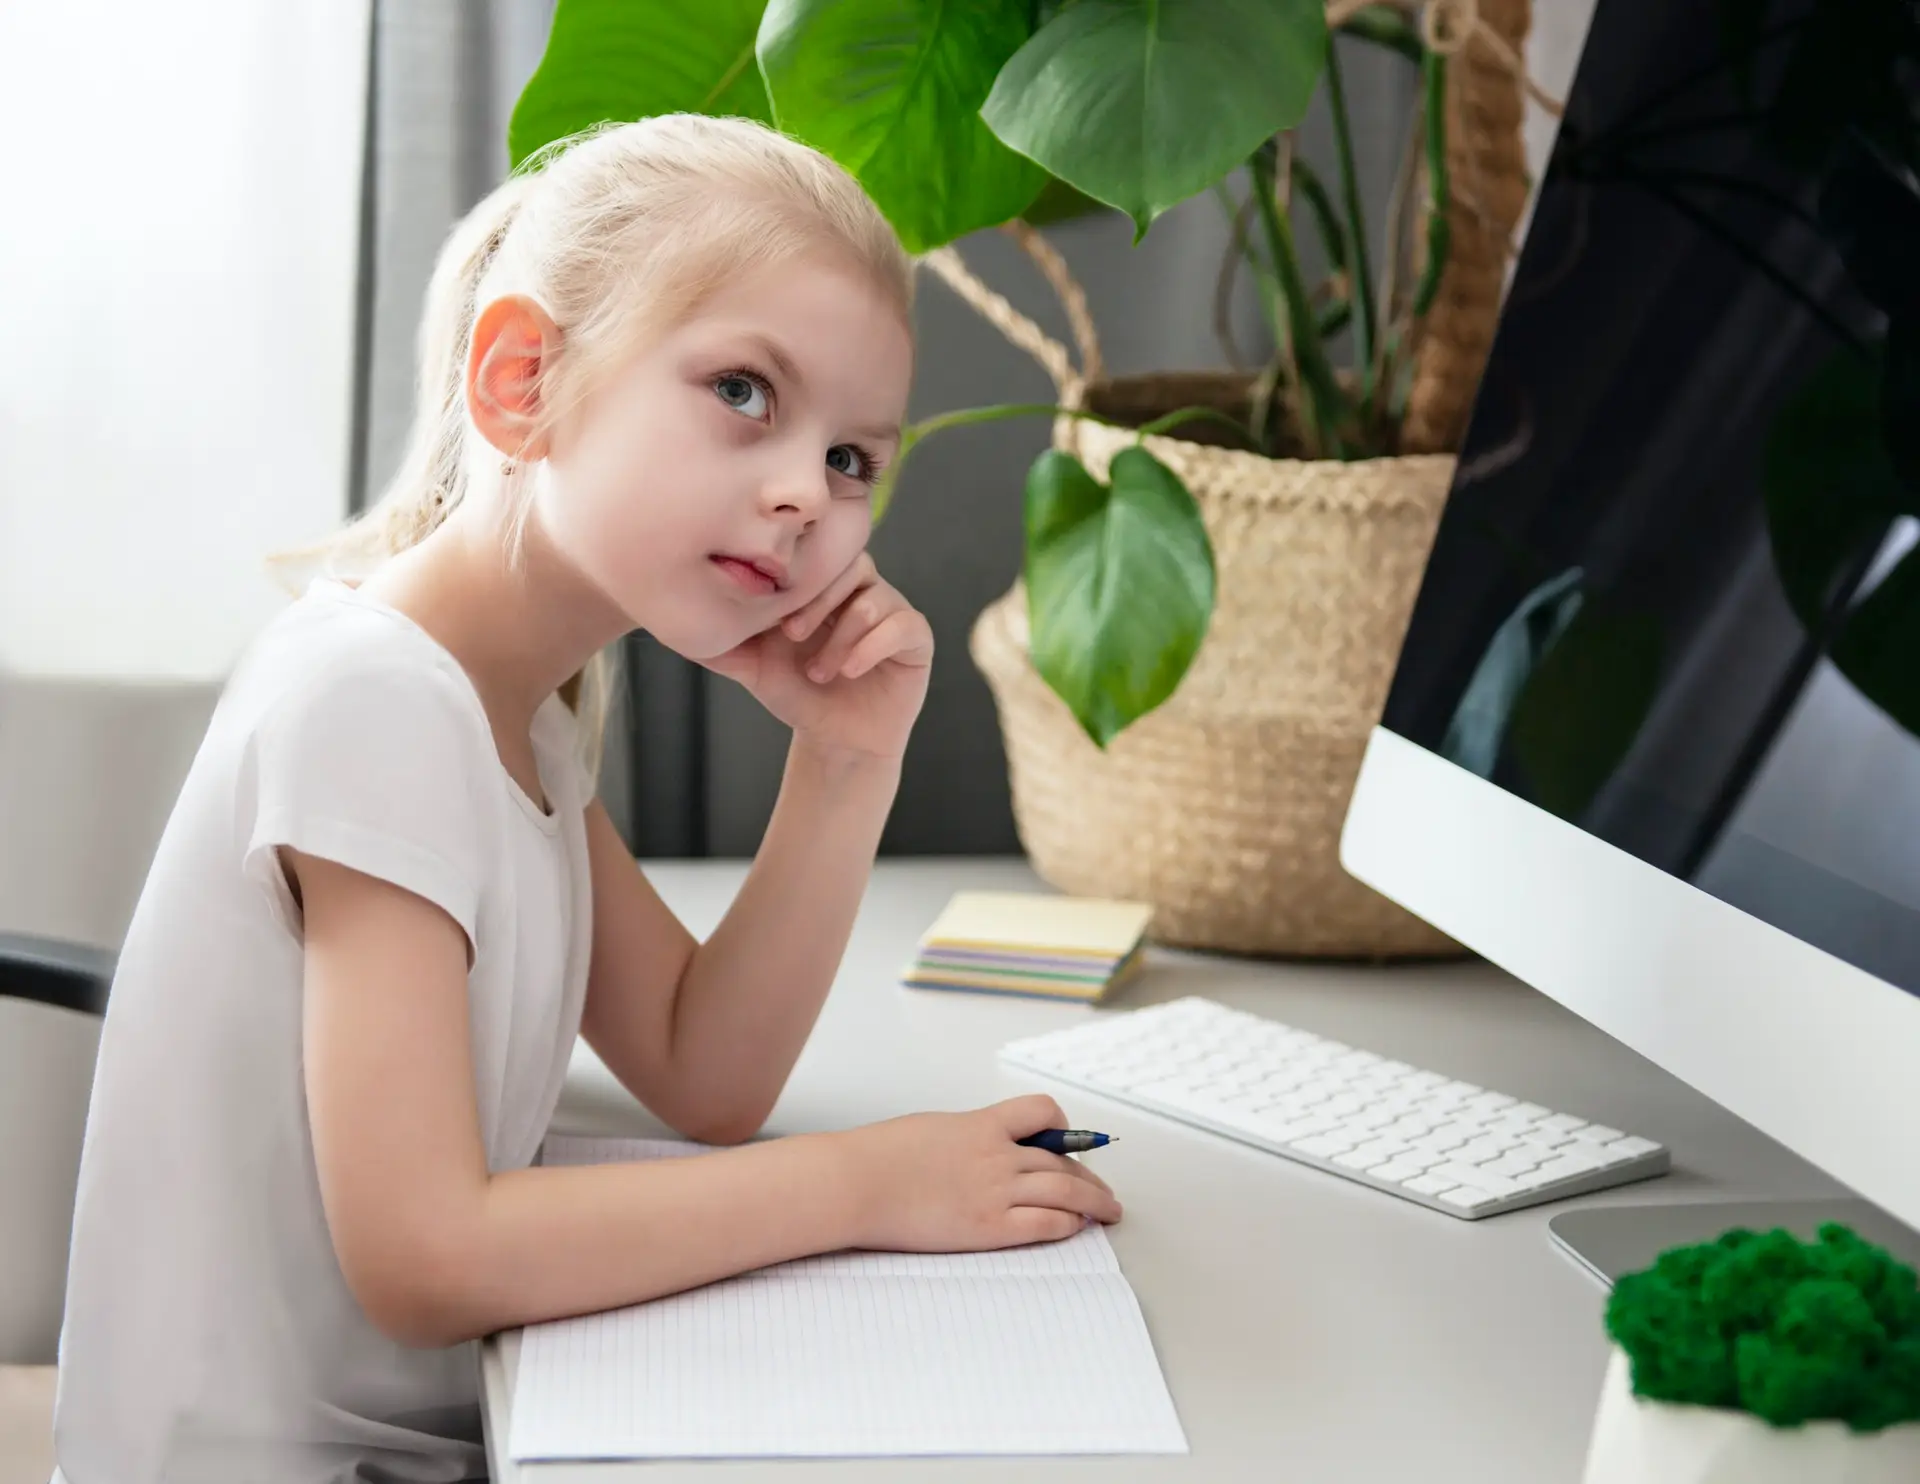 Young girl studying with notebook and computer at home desk with plant decoration.